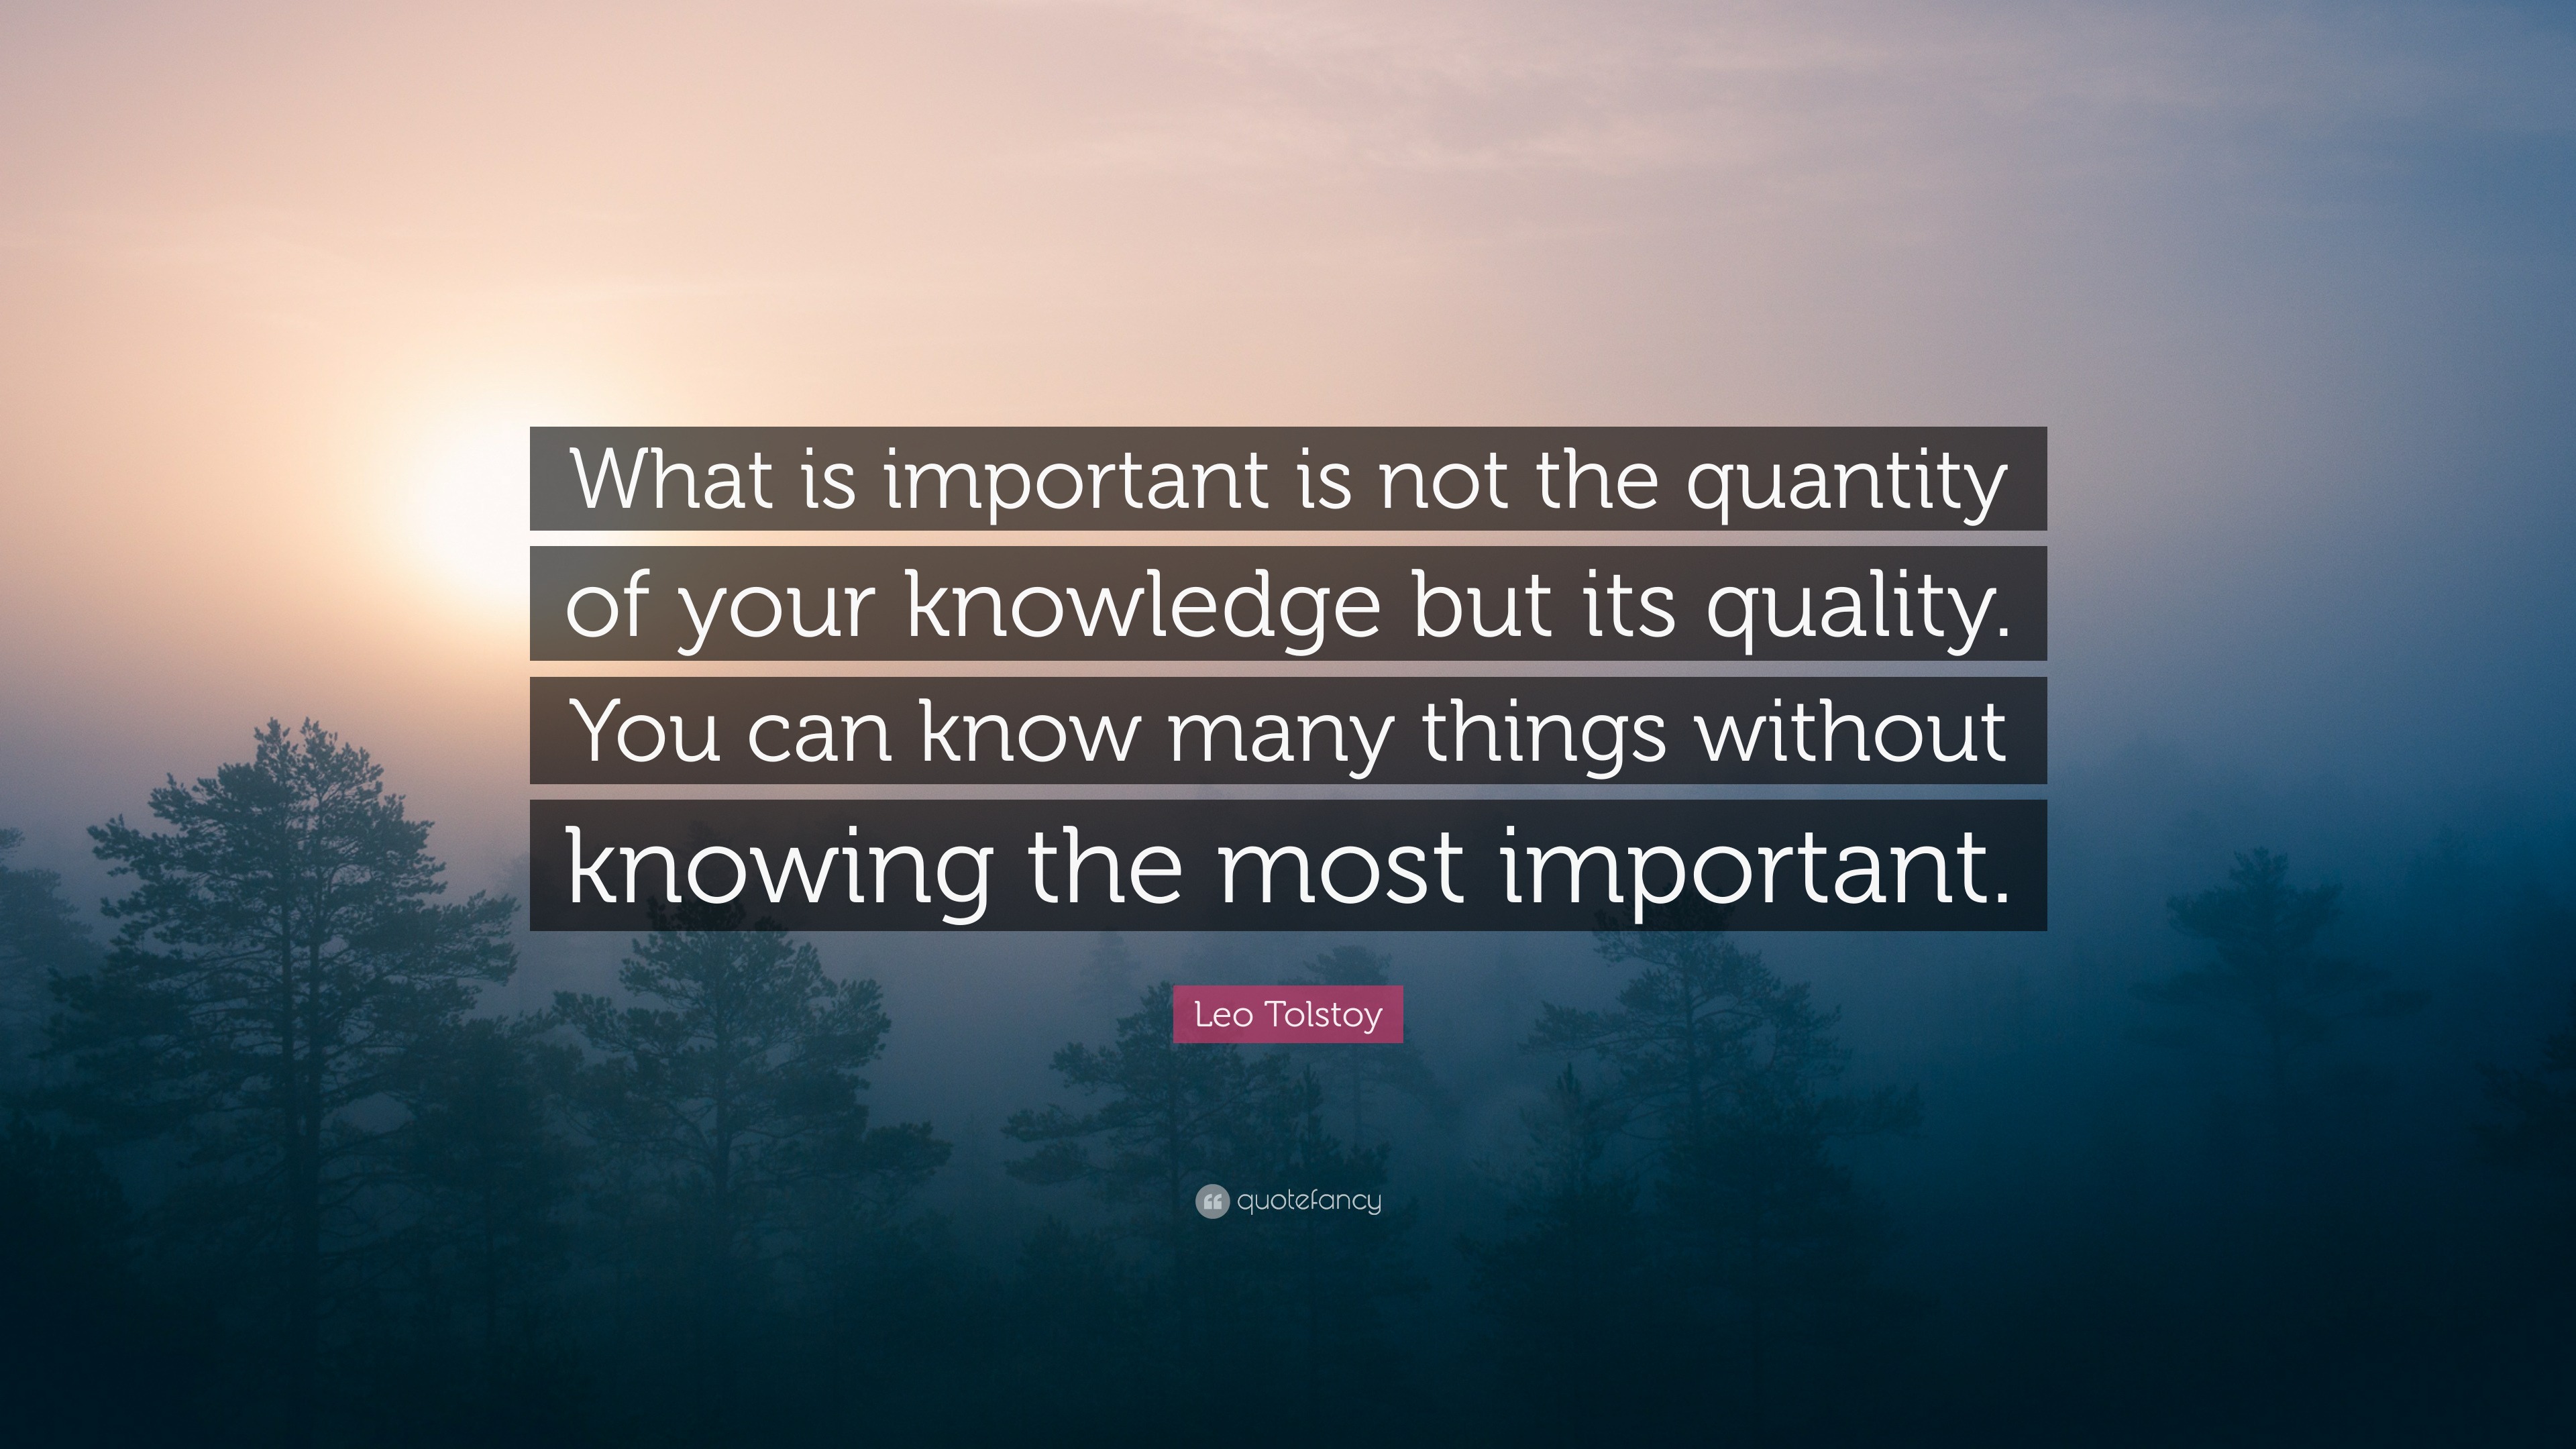 Leo Tolstoy Quote: “What is important is not the quantity of your